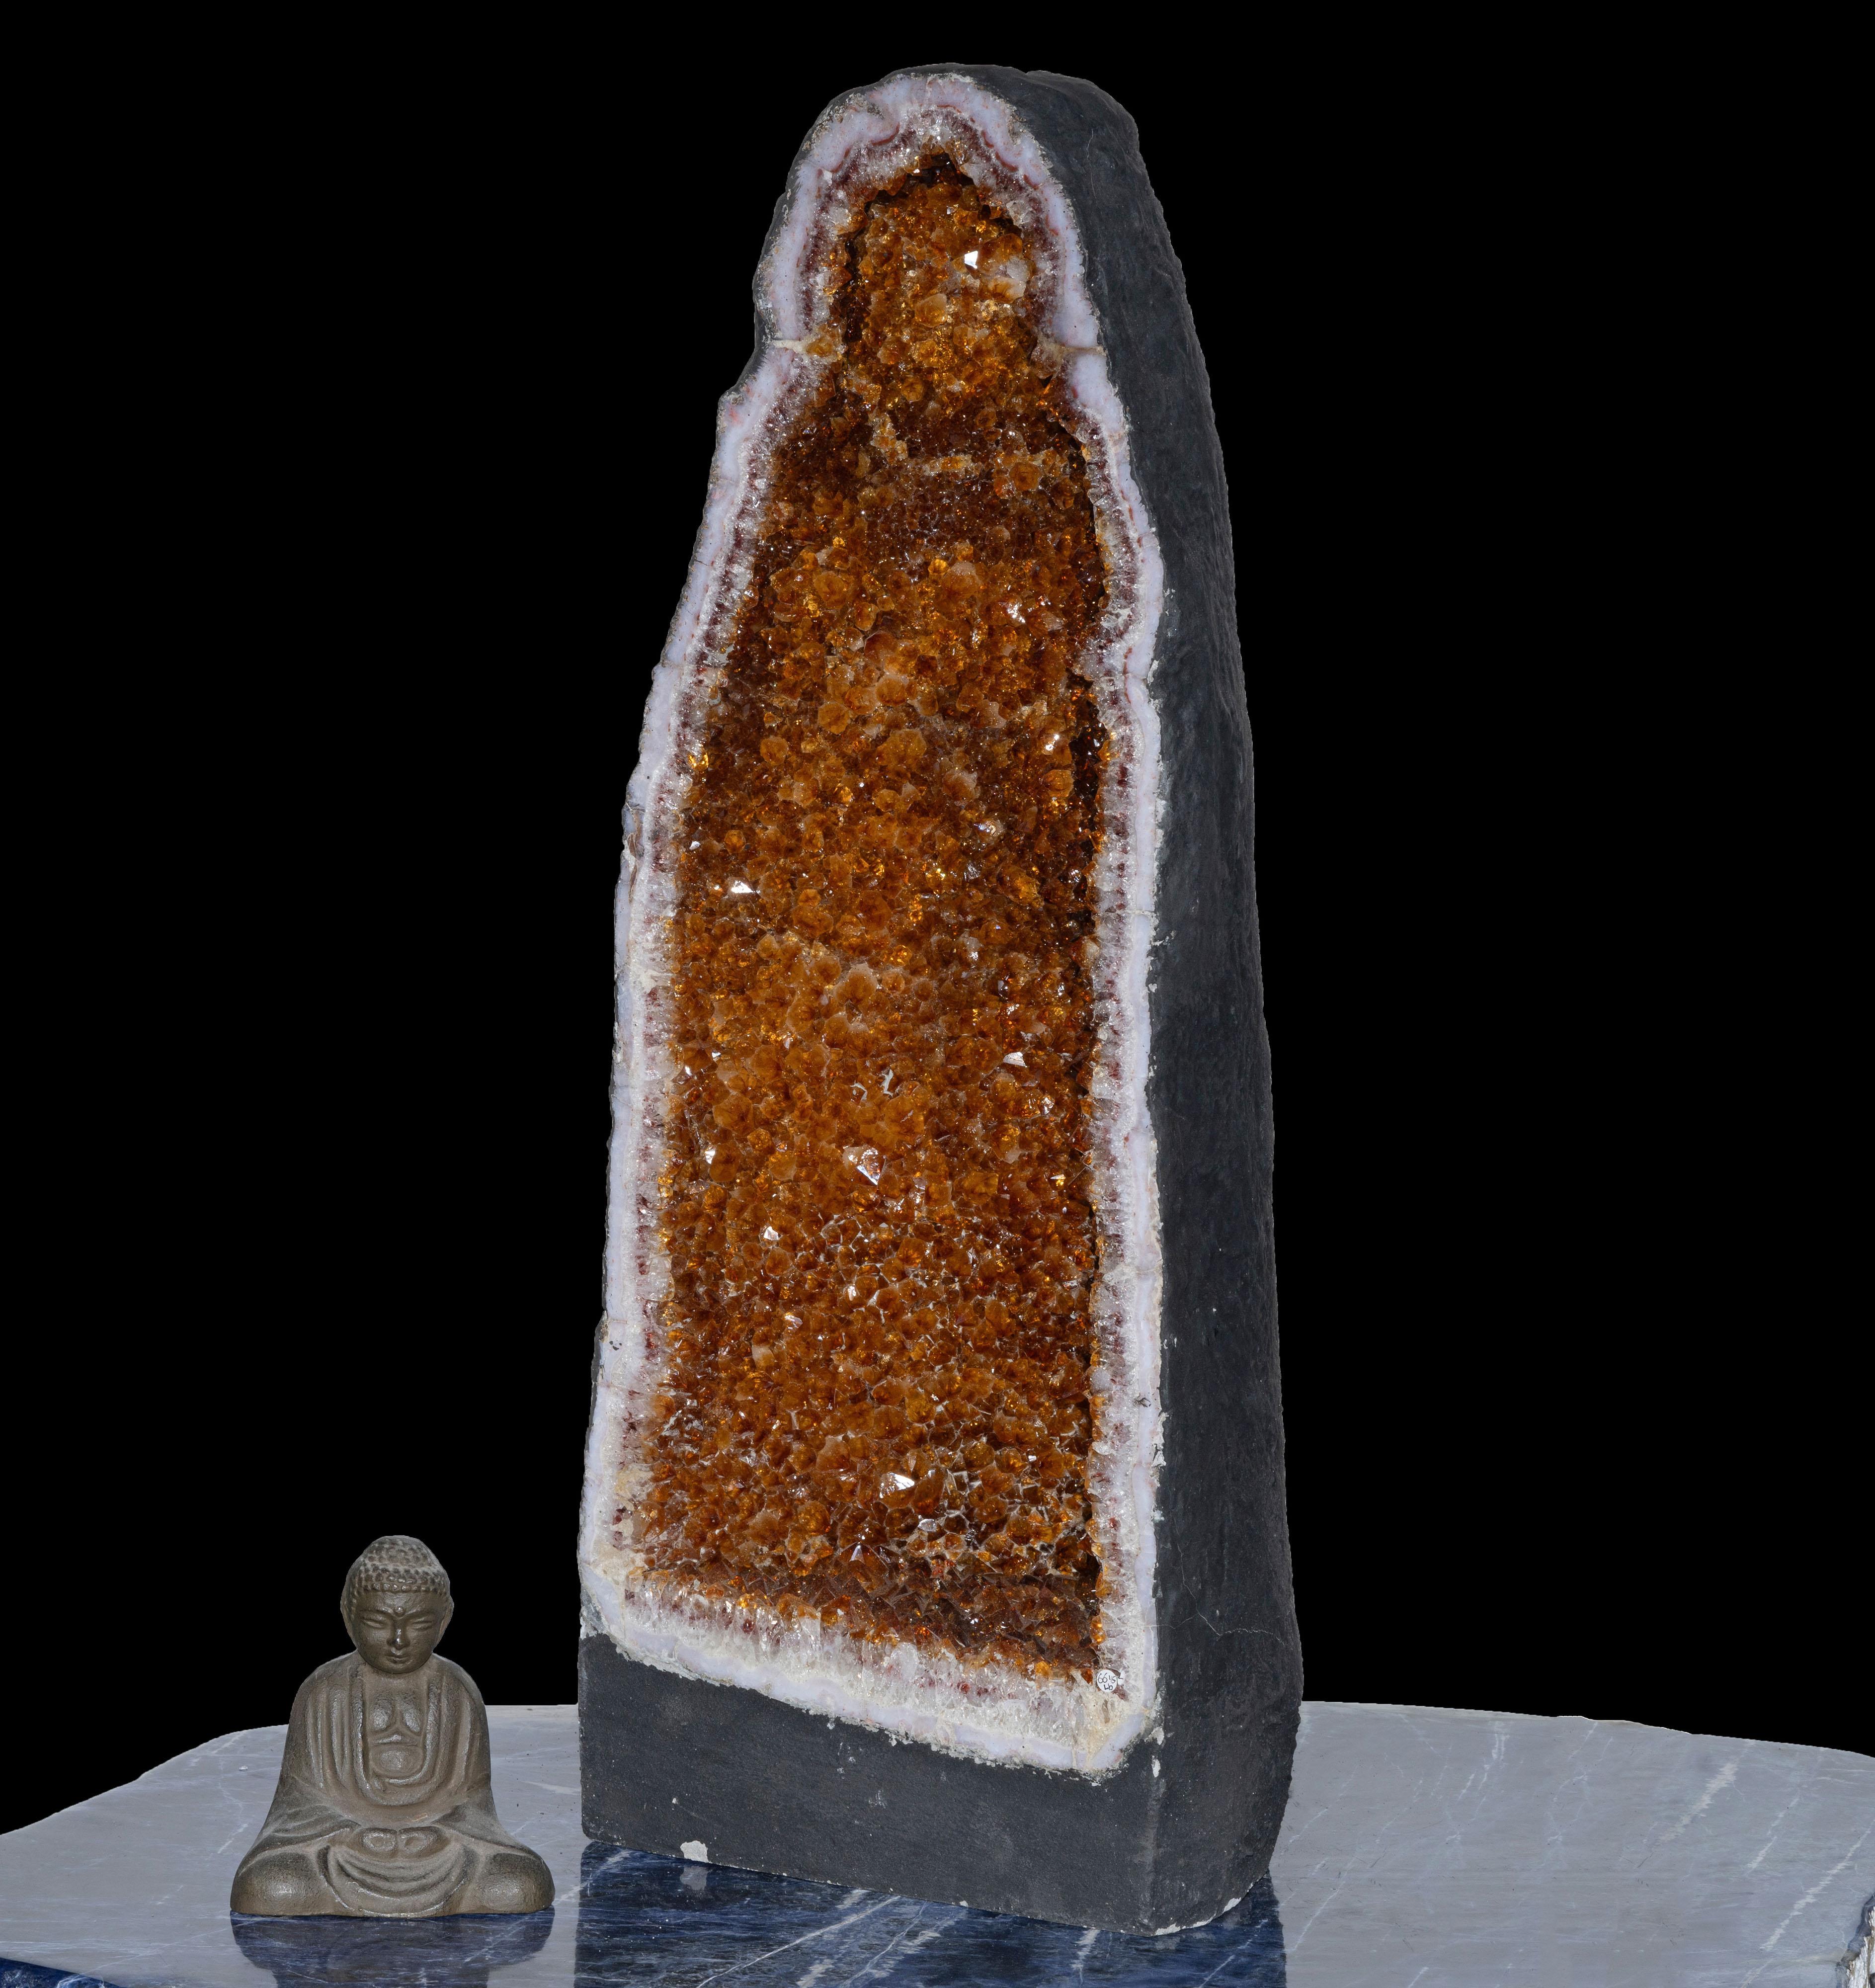 This over two foot tall sinuous citrine cathedral from Brazil glistens from within with a lustrous coating of naturally terminated, fully formed, fiery amber citrine crystals. This substantial acquisition will add color and sparkle to any atmosphere